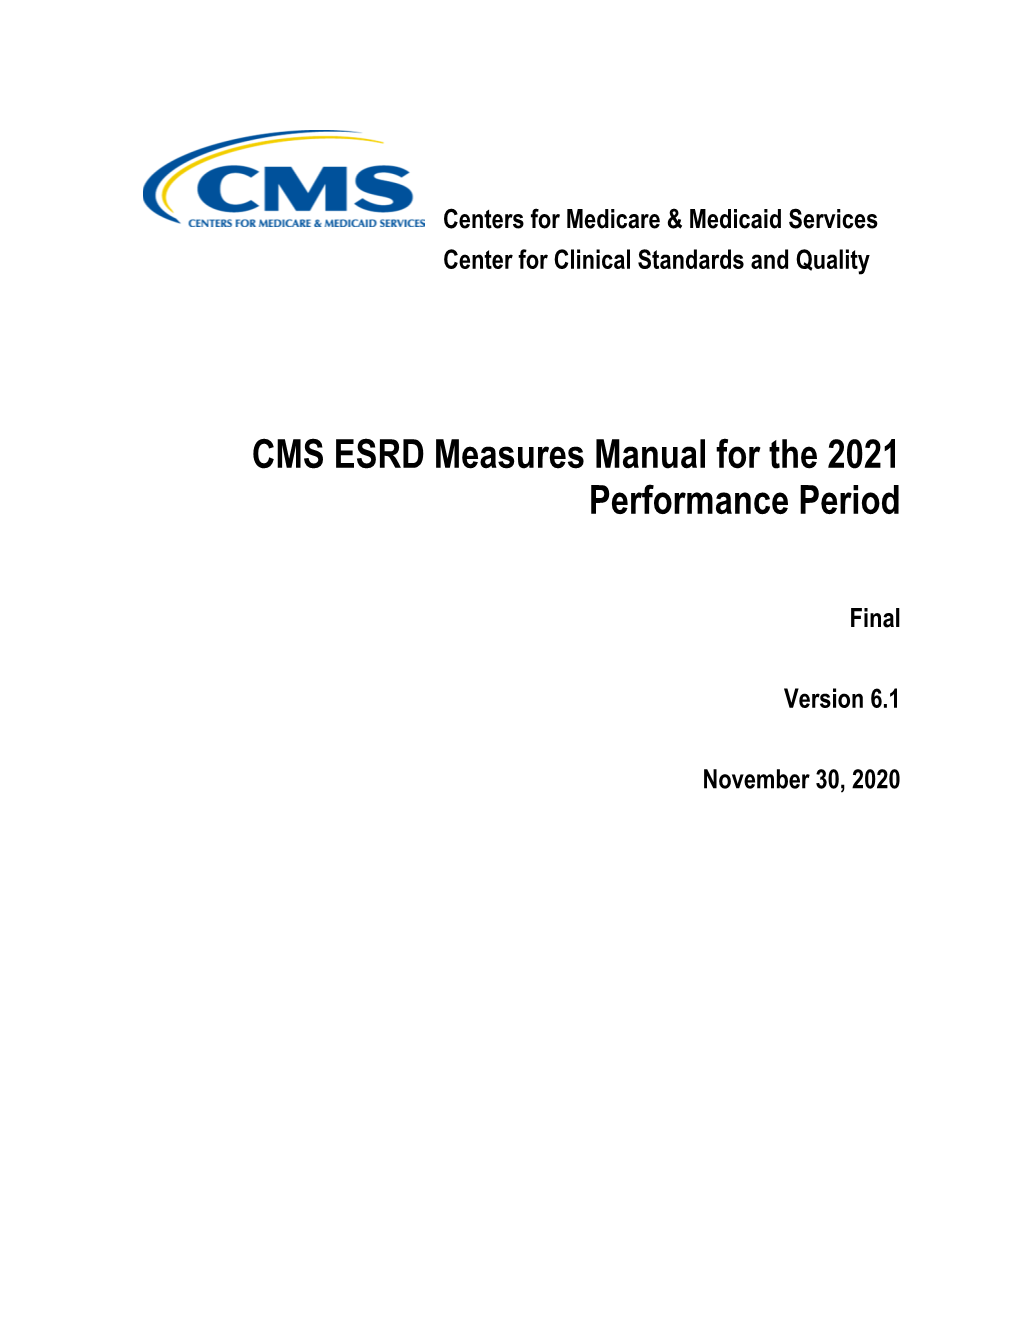 CMS ESRD Measures Manual for the 2021 Performance Period